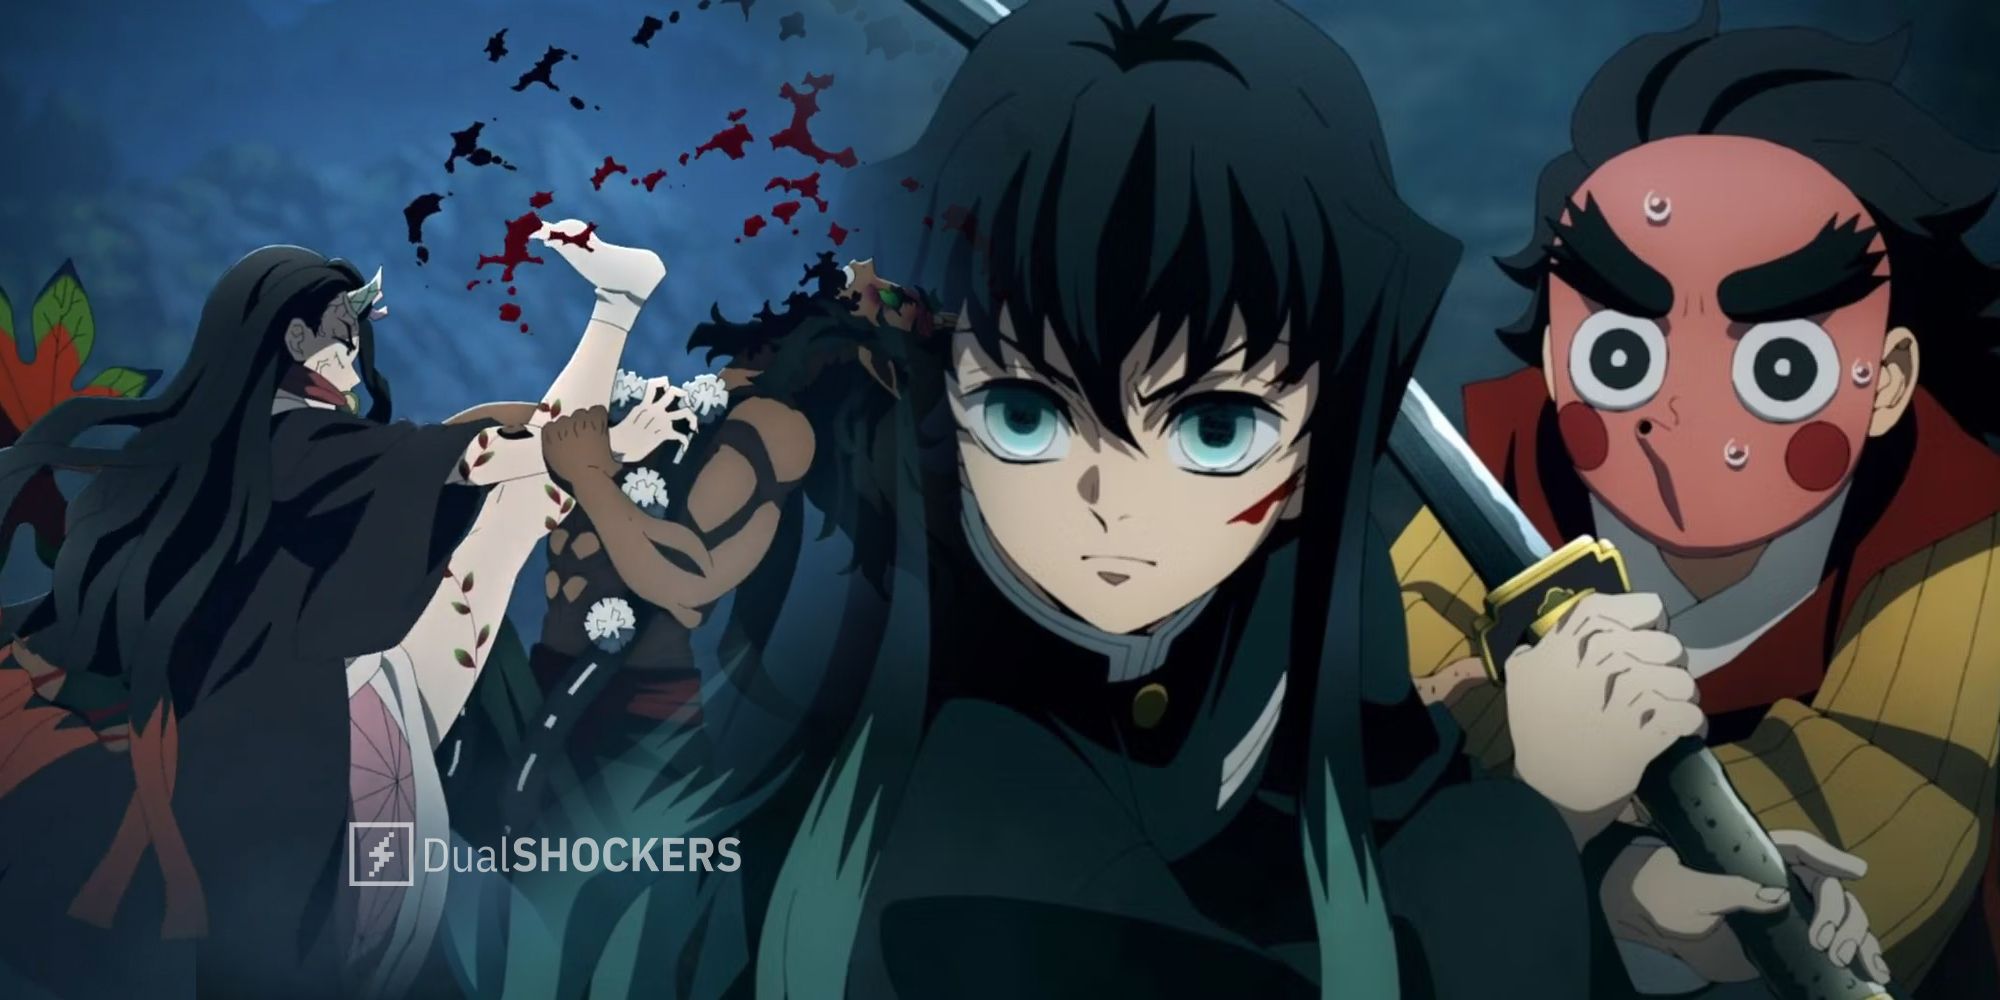 Demon Slayer Season 3 Episode 4 Release Date, Time, And How To Watch